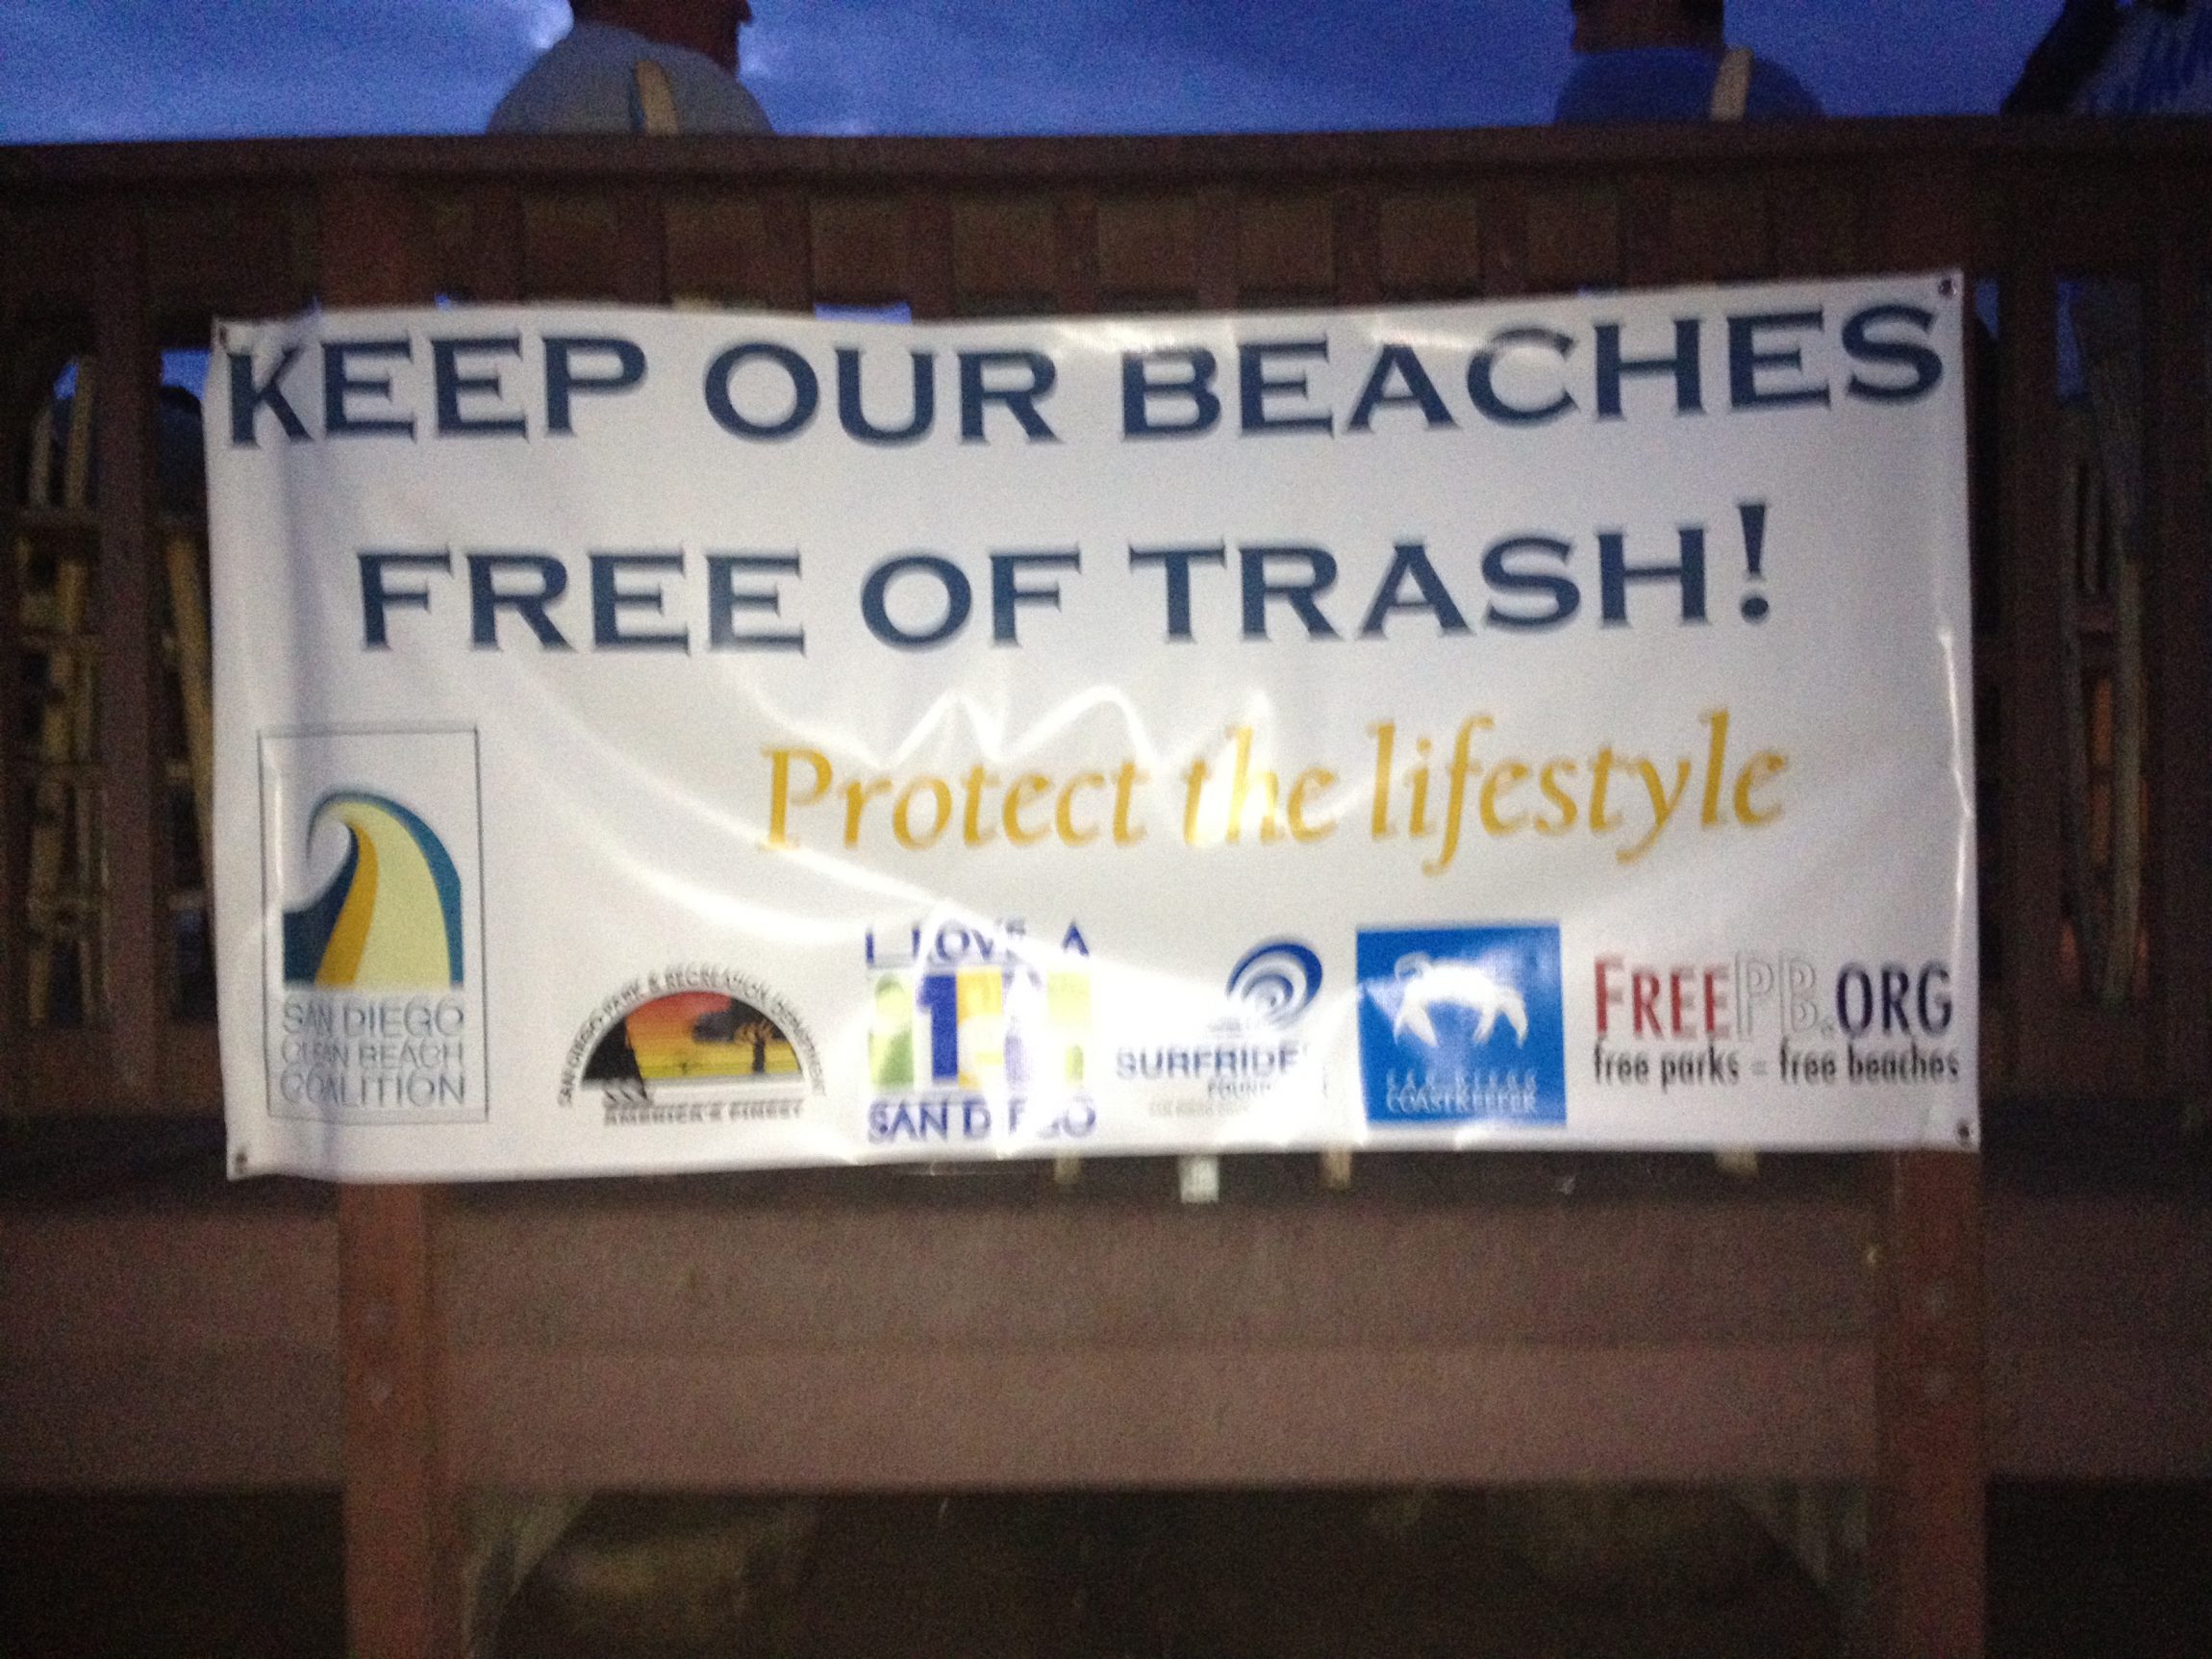 These signs will provide a helpful reminder to beachgoers this Labor Day weekend!